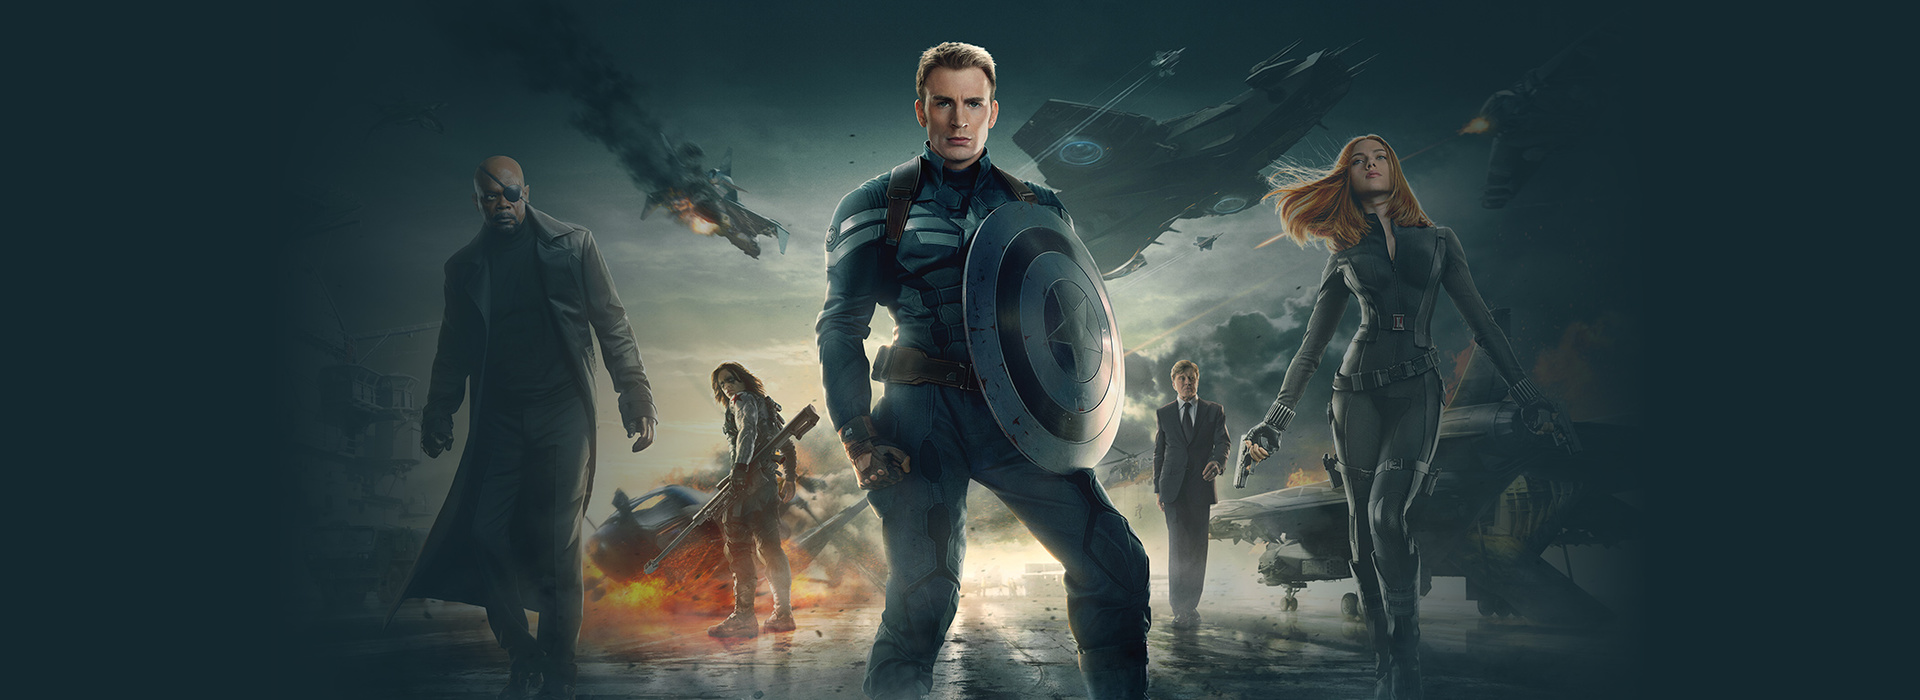 Movie poster Captain America: The Winter Soldier